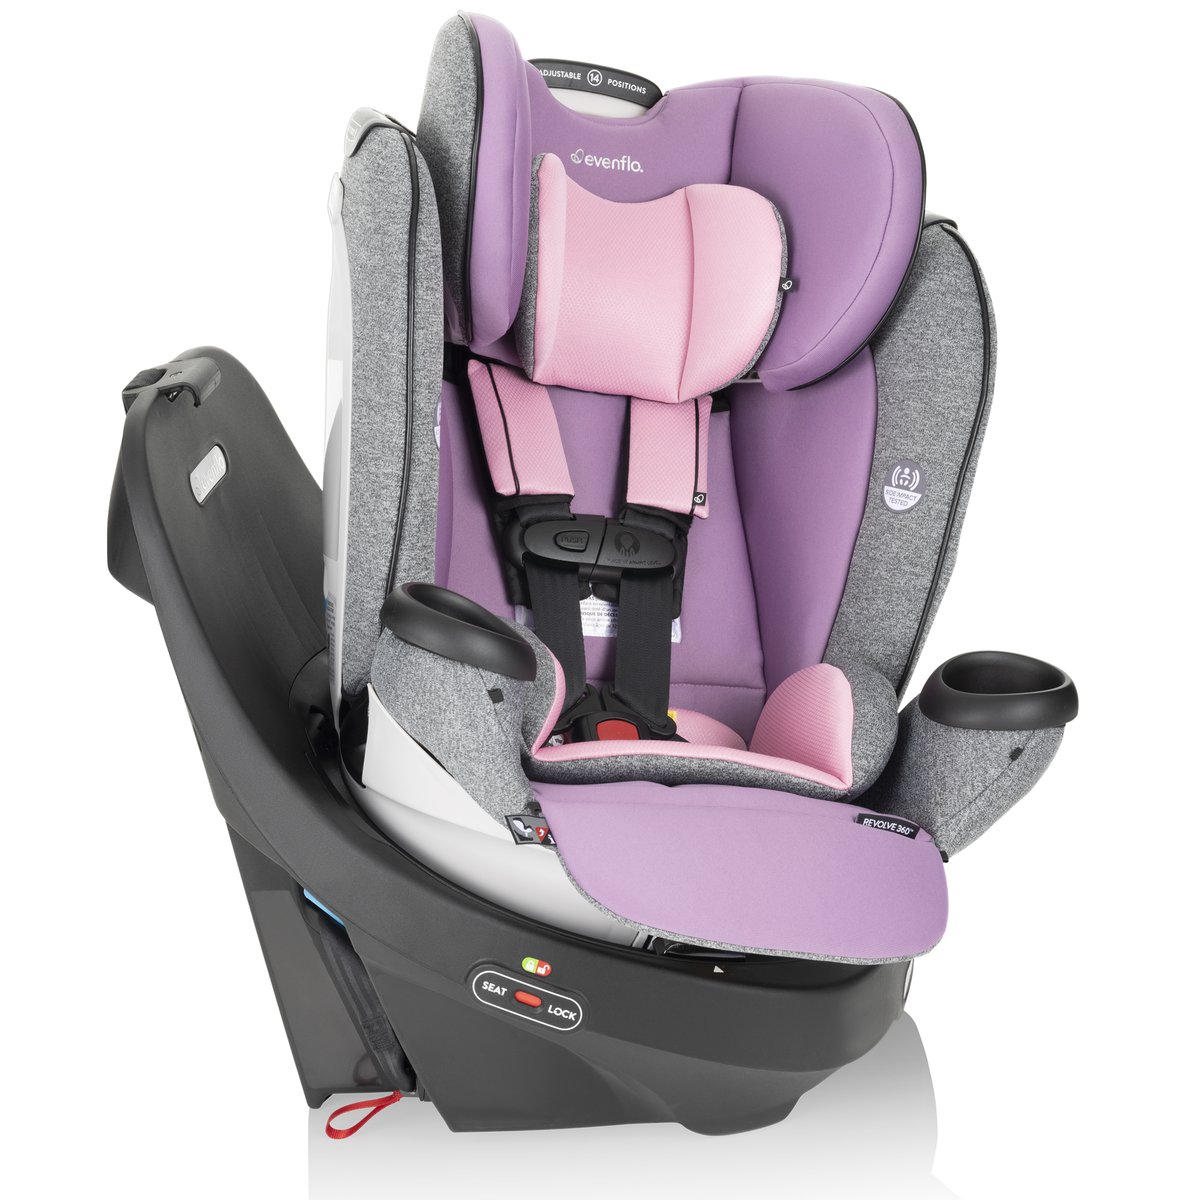 Best Convertible Car Seat for Long Babies